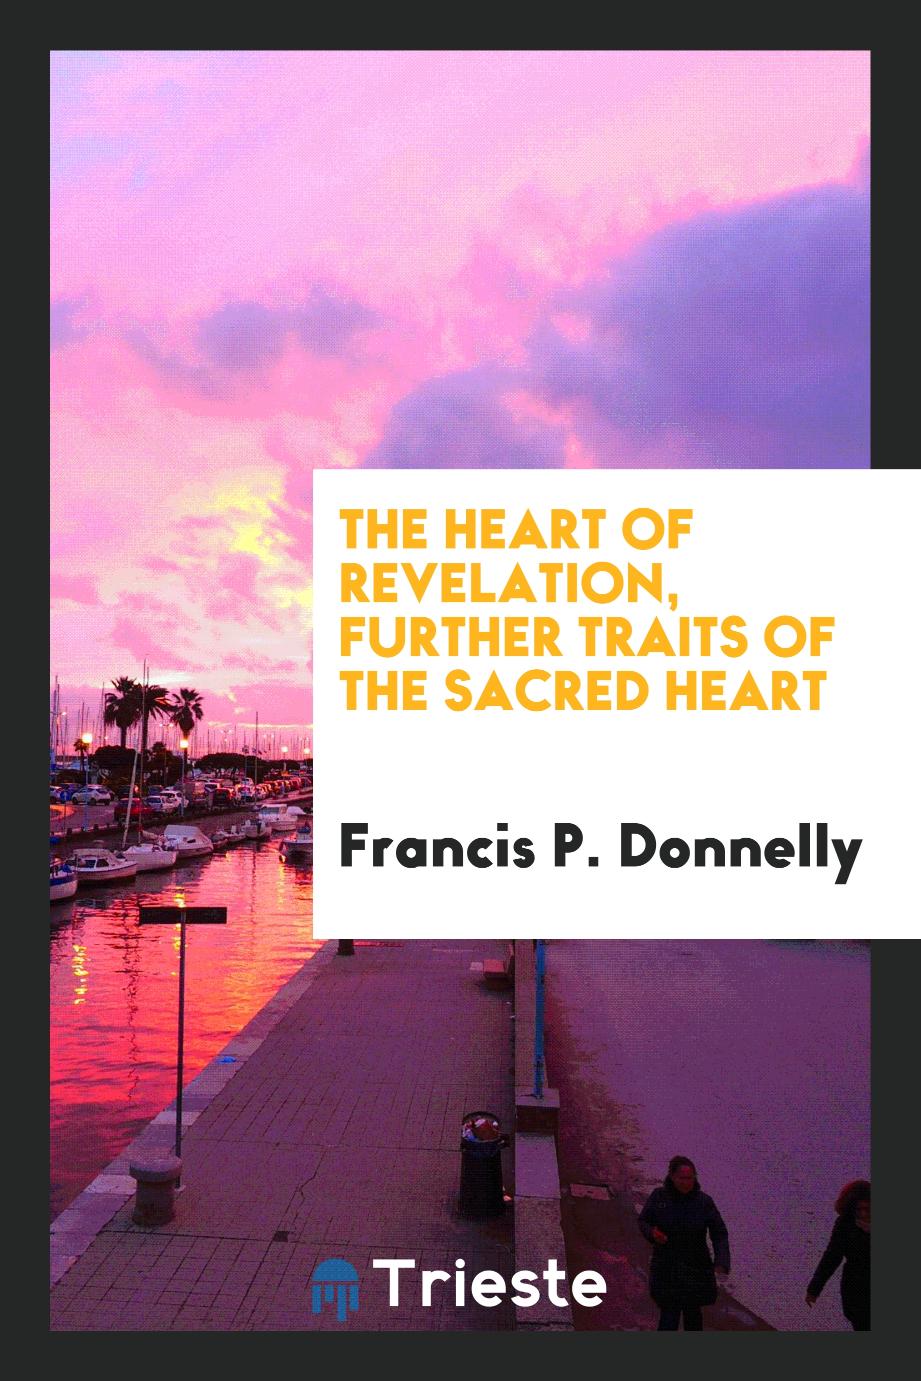 The heart of revelation, further traits of the Sacred heart